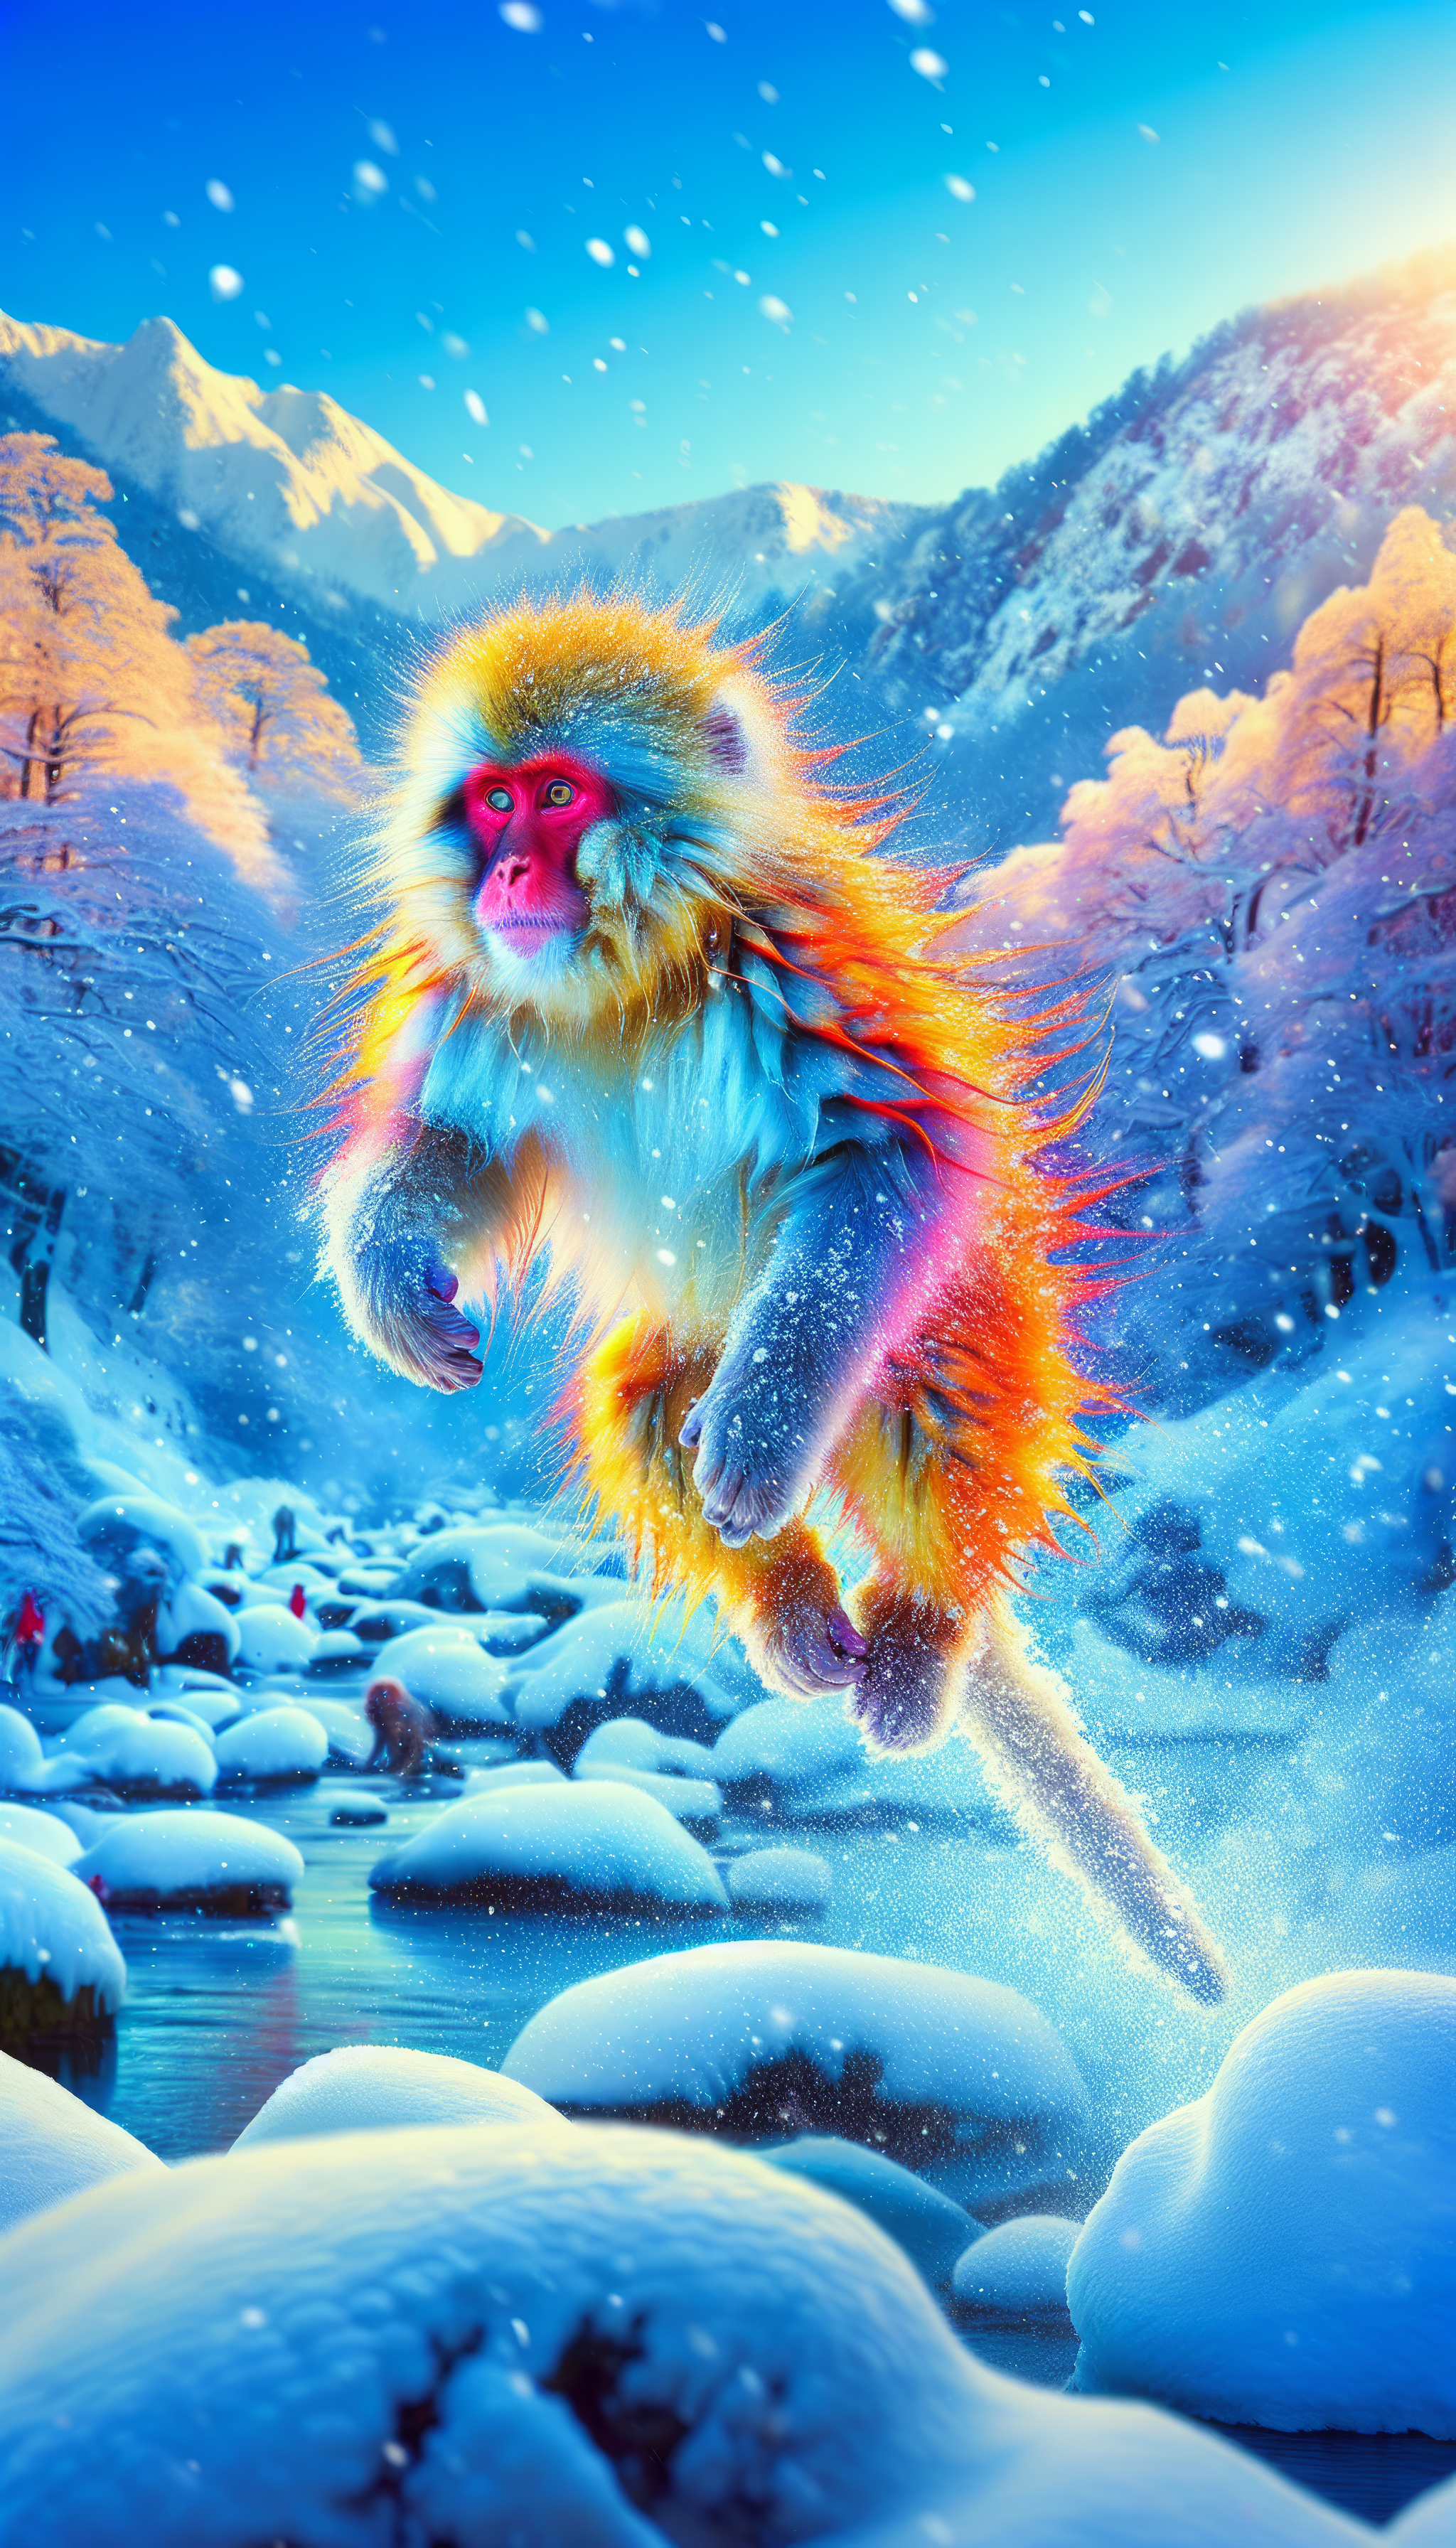 Colorful, vibrant image of a snow monkey in a winter landscape, ideal for a phone wallpaper with a wintry theme.